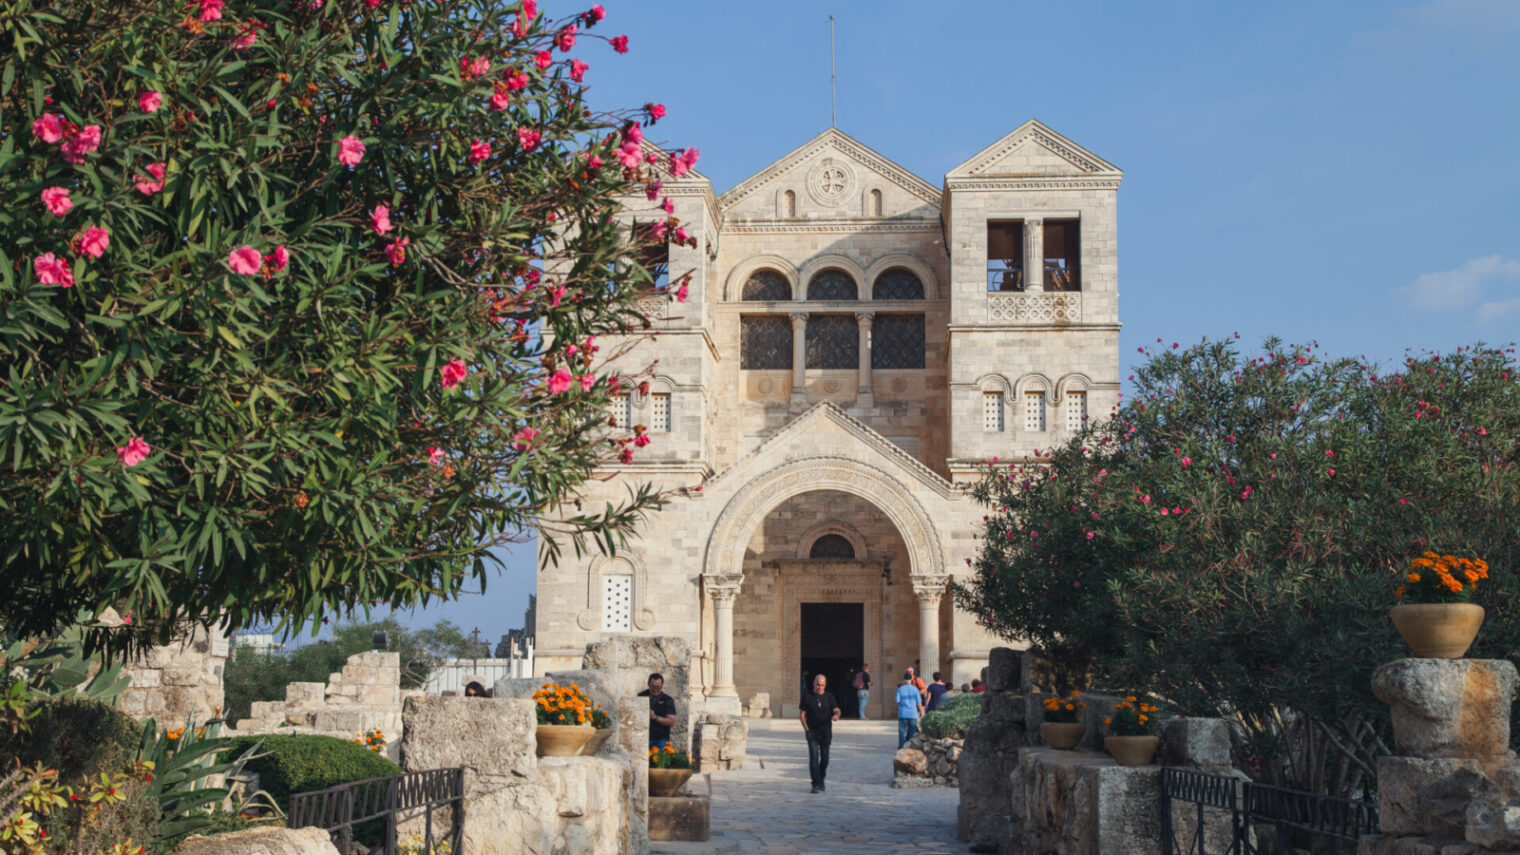 The Church of the Transfiguration at Mount Tabor. Photo by Zuza Rozanska, Shutterstock